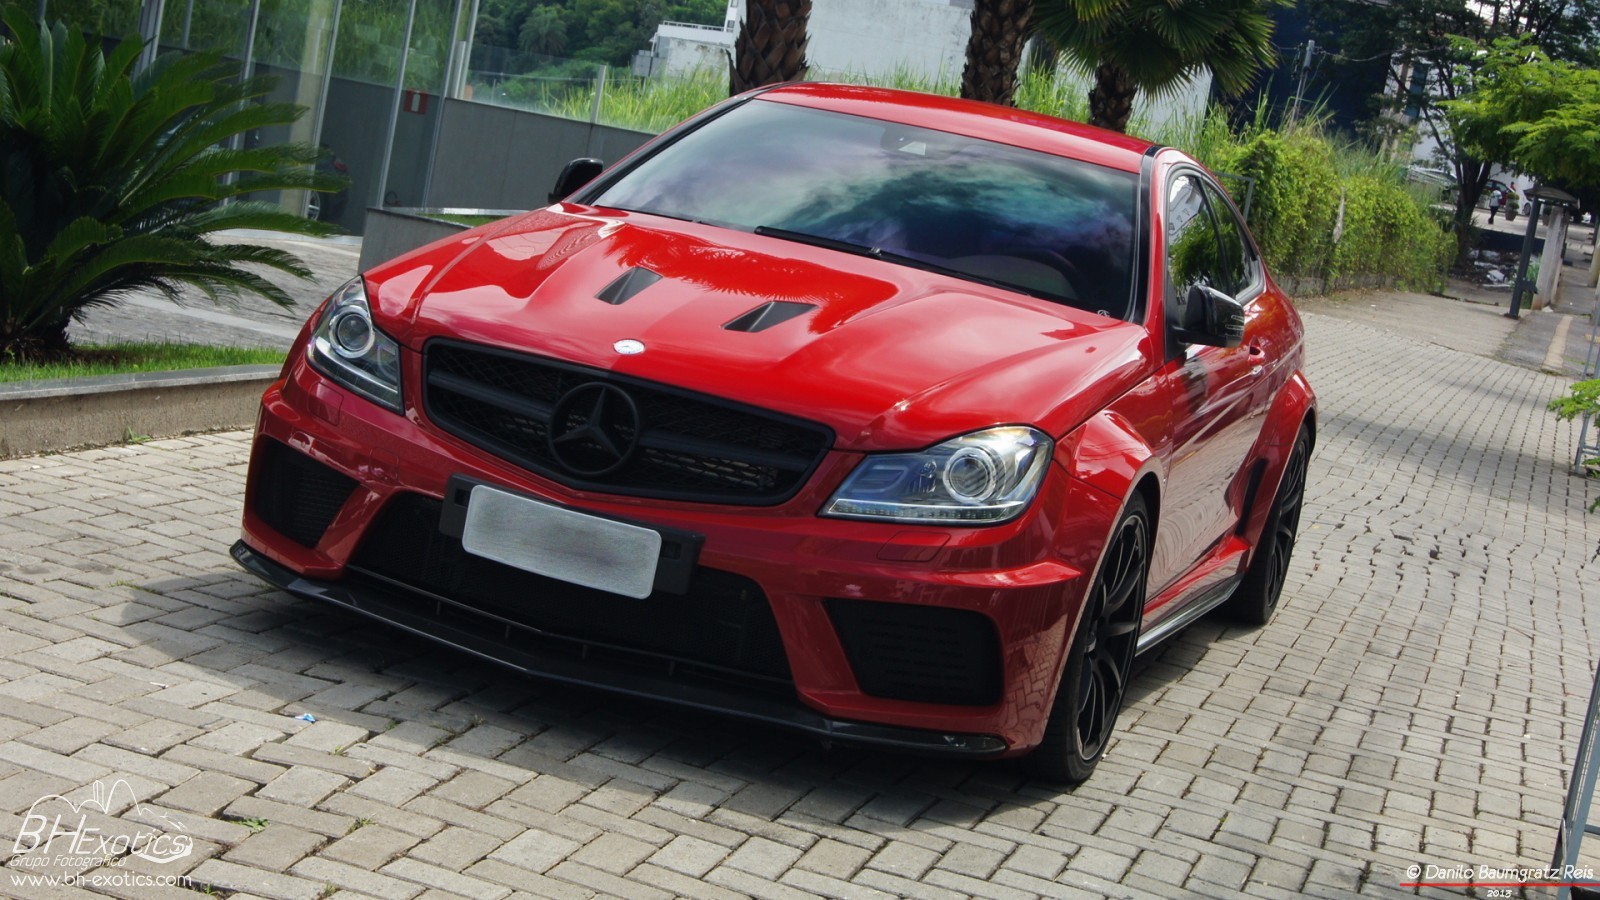 General 1600x900 car sports car Mercedes-Benz coupe vehicle red cars Mercedes-Benz C63 AMG frontal view headlights watermarked 2013 (Year)